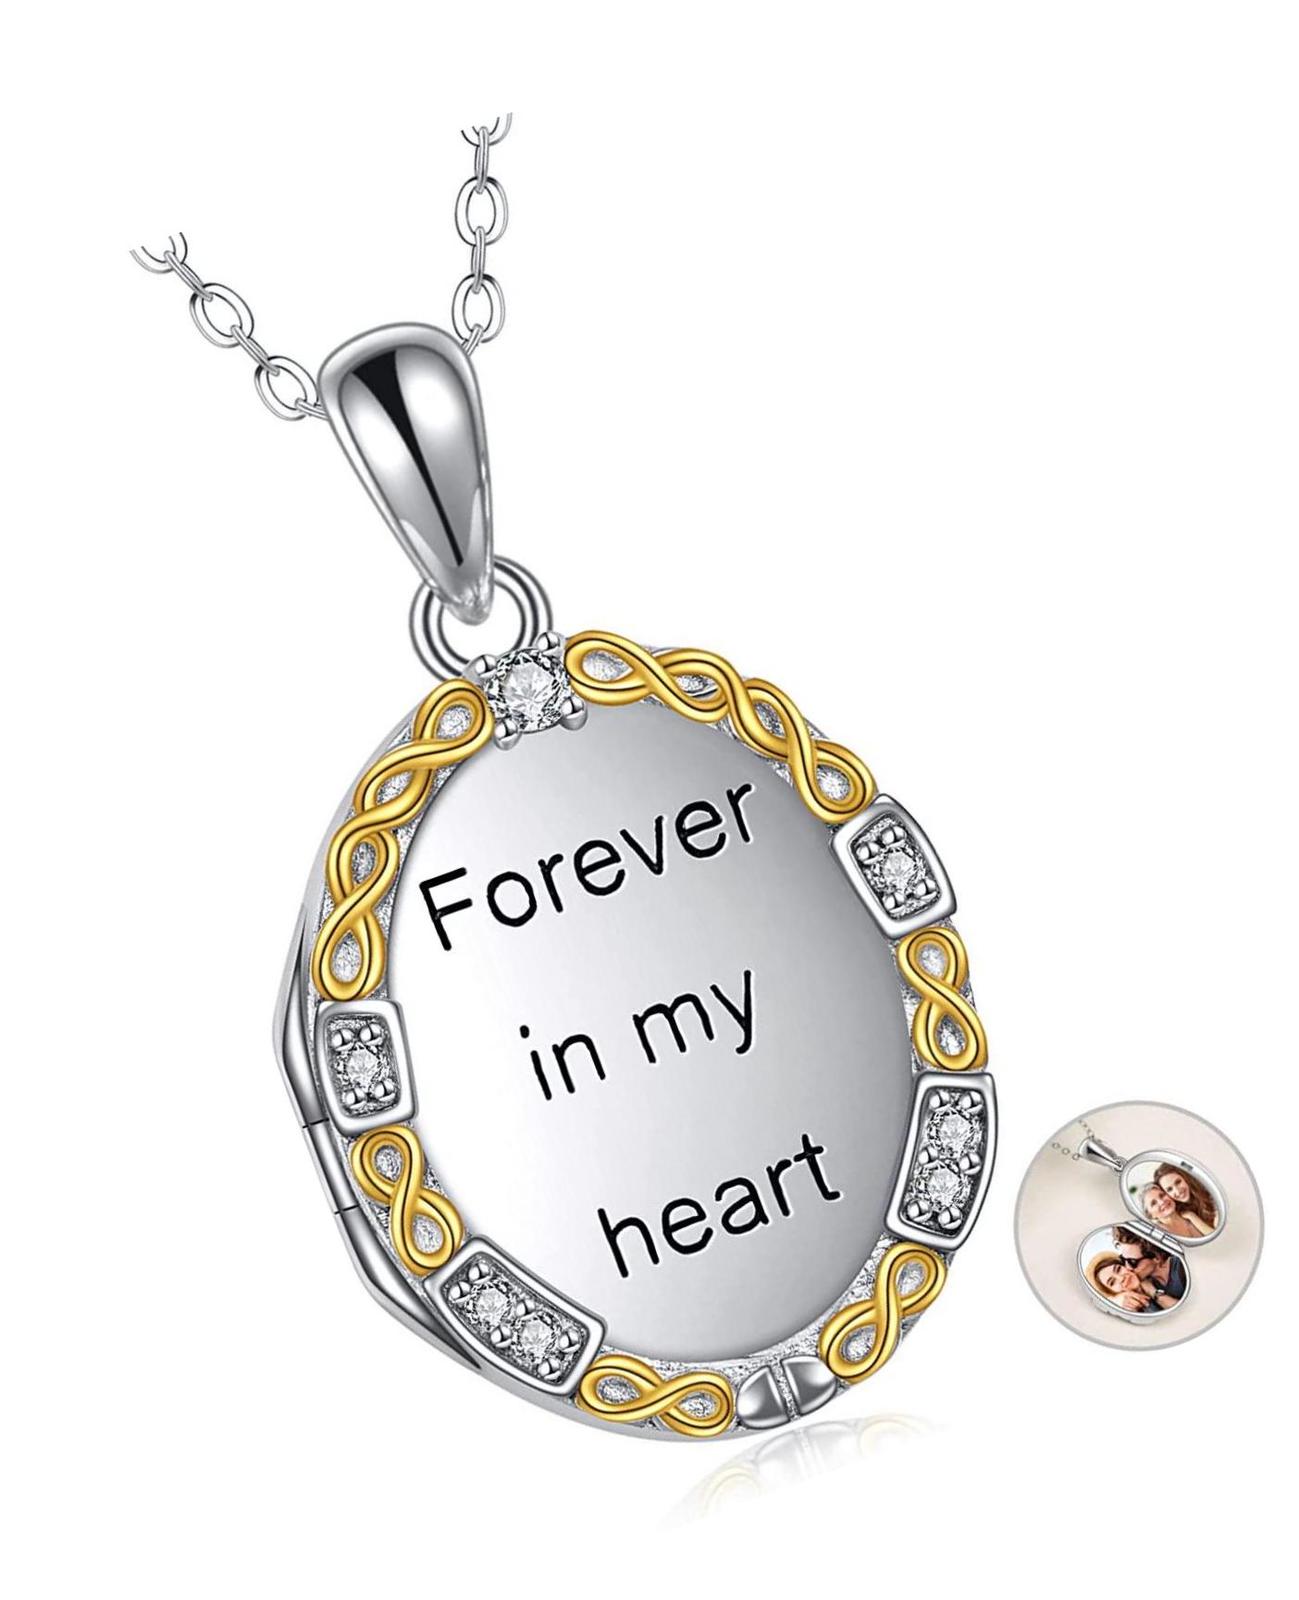 Oval Locket Necklace That Hold Pictures Sterling in My - $142.84